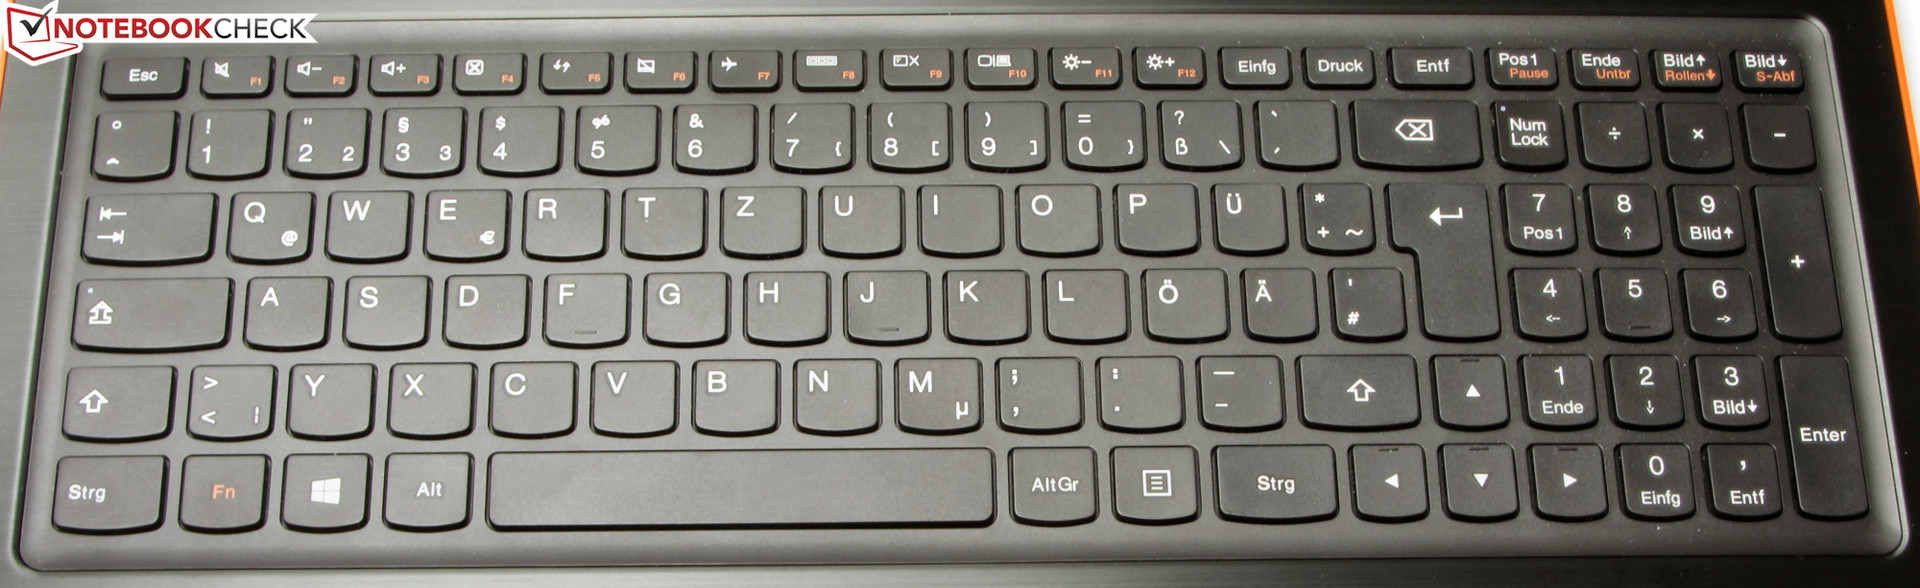 How To Reset Microsoft Wedge Keyboard Instructions